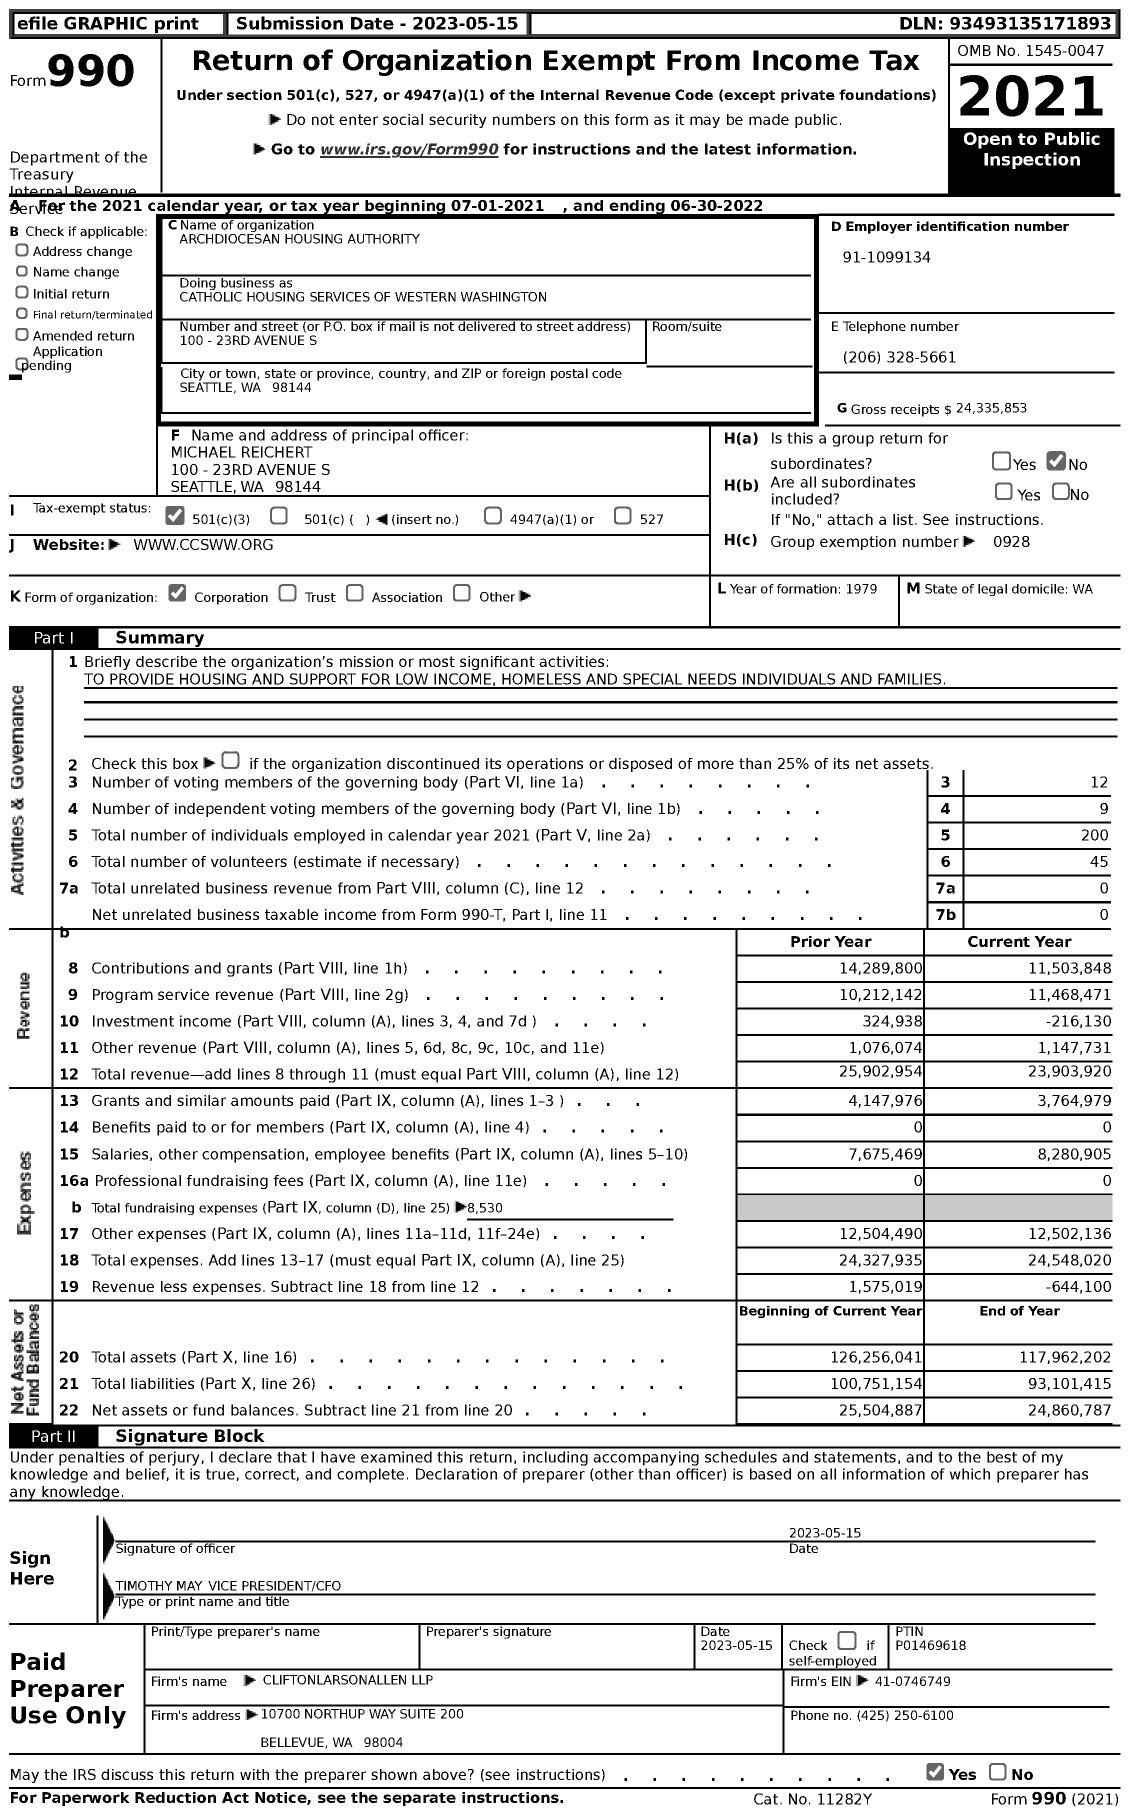 Image of first page of 2021 Form 990 for Catholic Housing Services of Western Washington